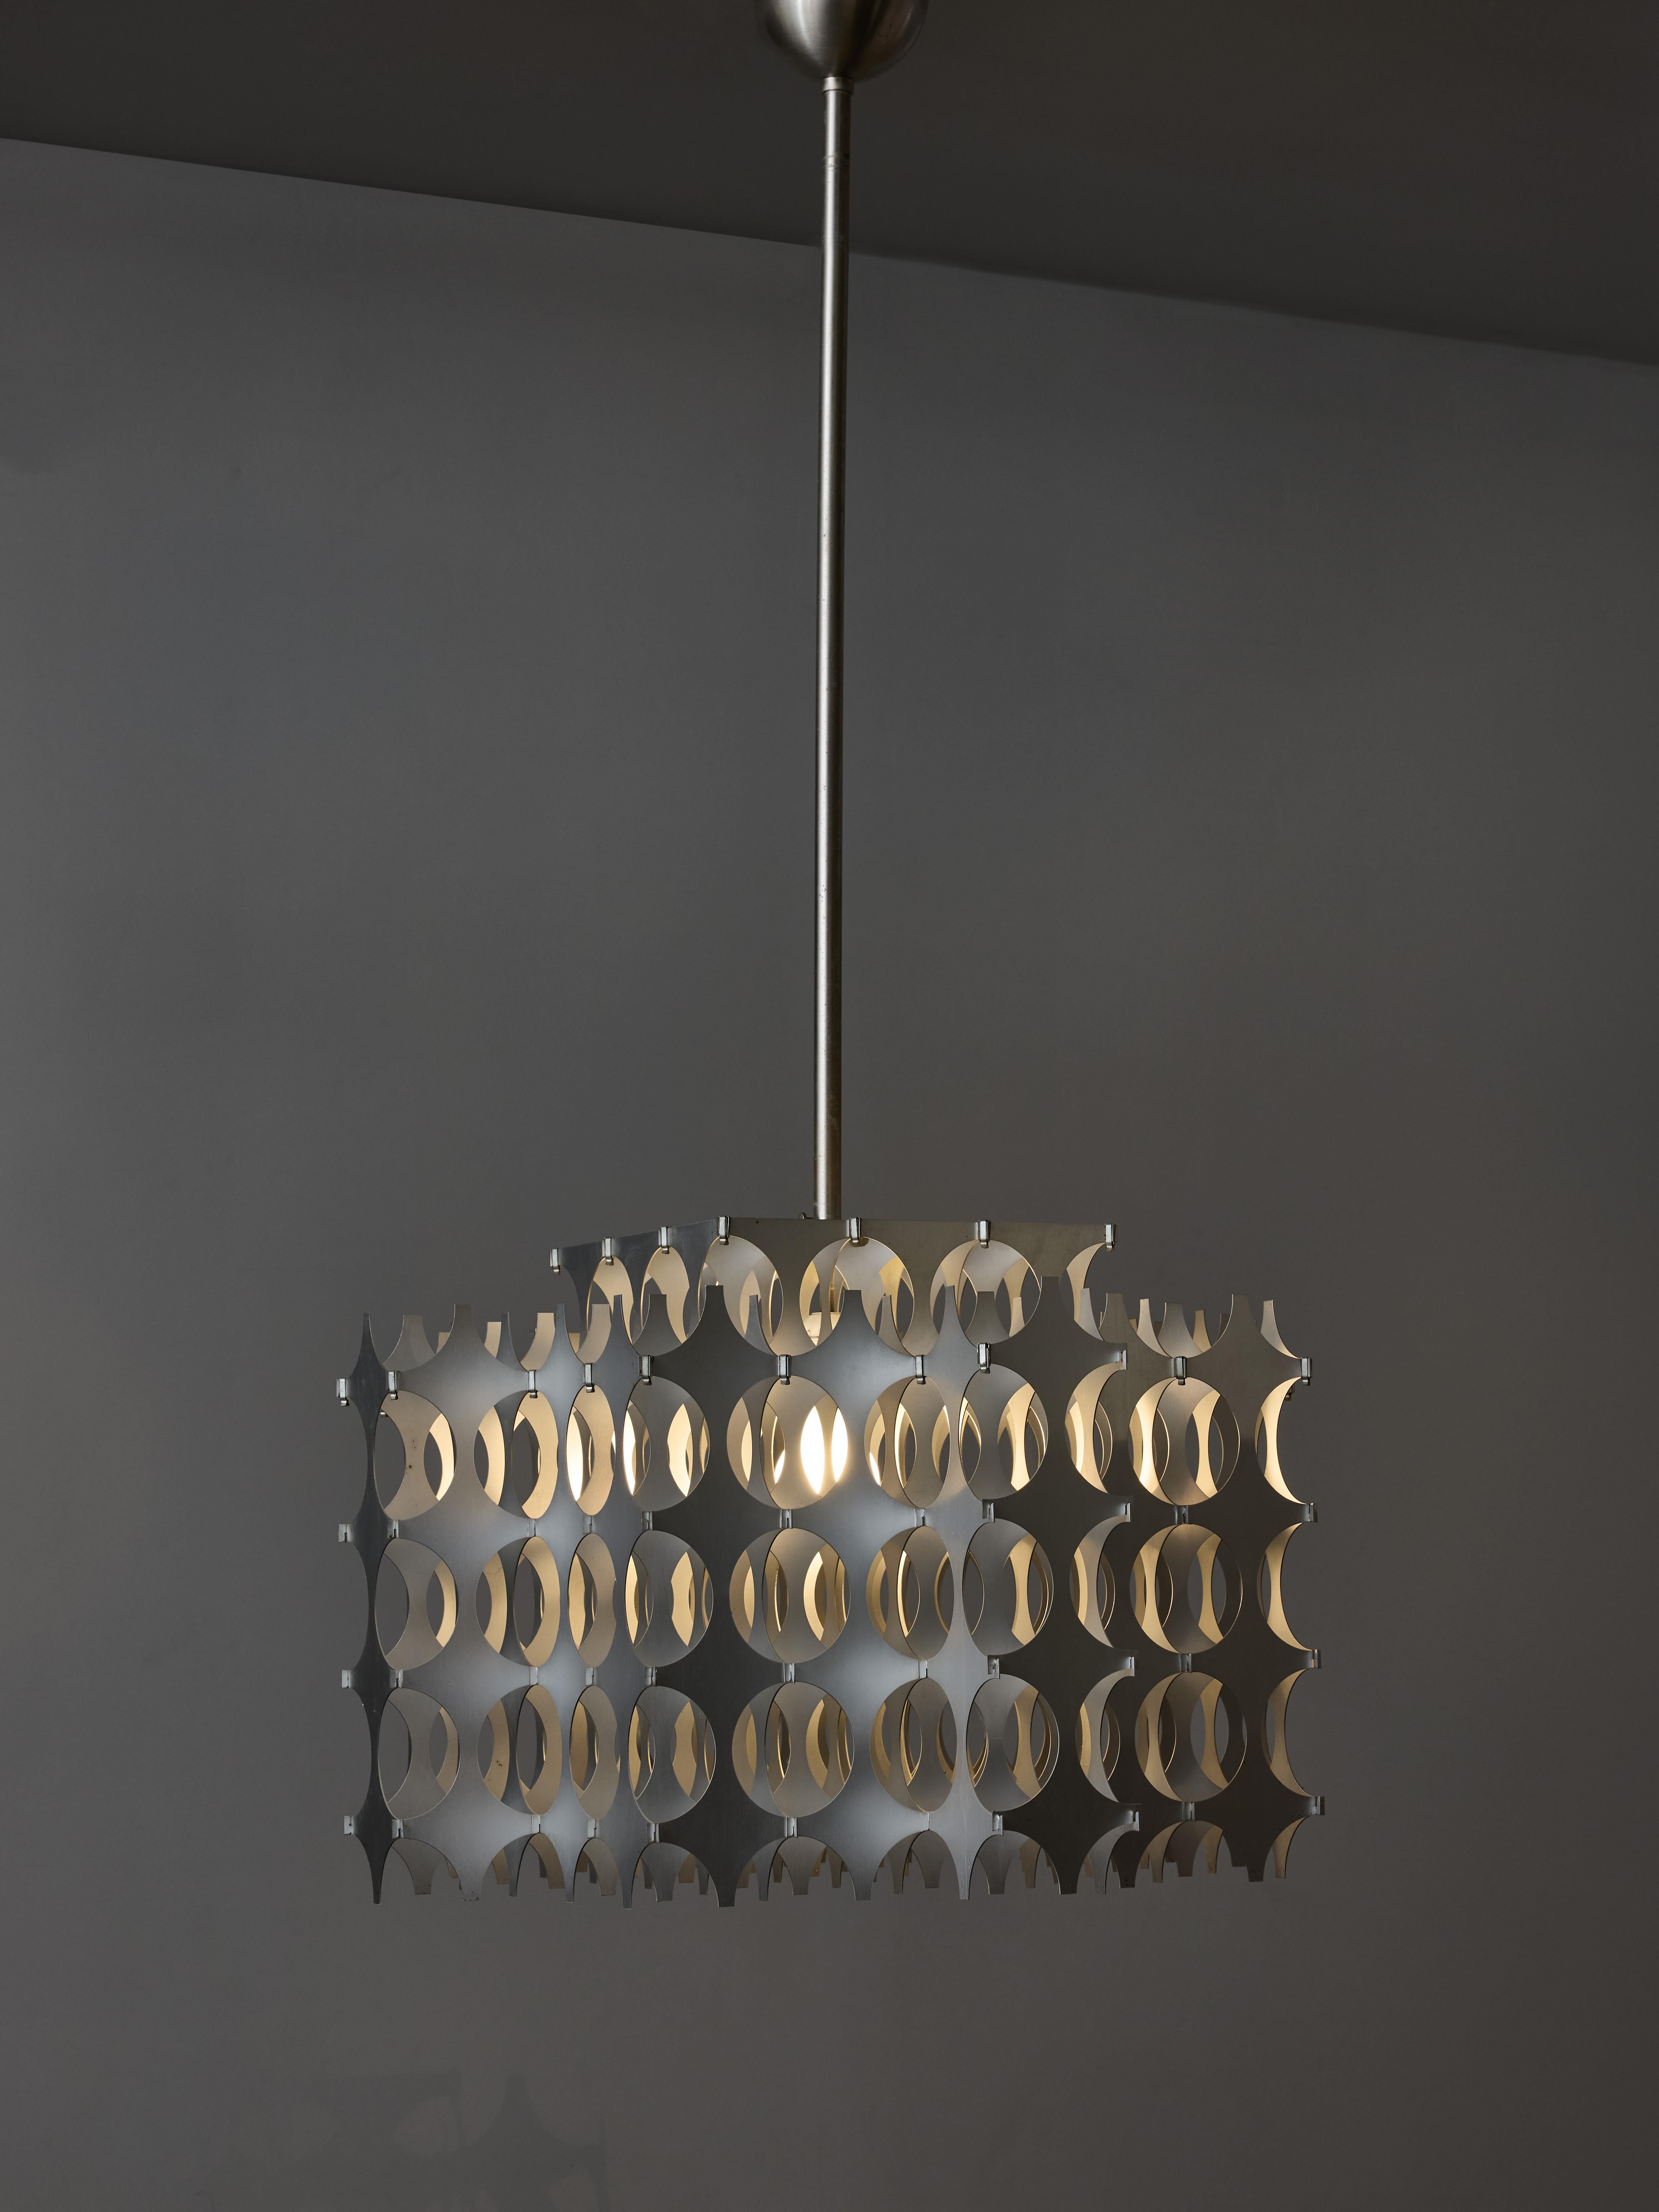 Kinetic chandelier designed by Mario Marenco for Artemide made of cut aluminium panels intertwined together to form this square shaped chandelier that change its apparence depending on the angle.